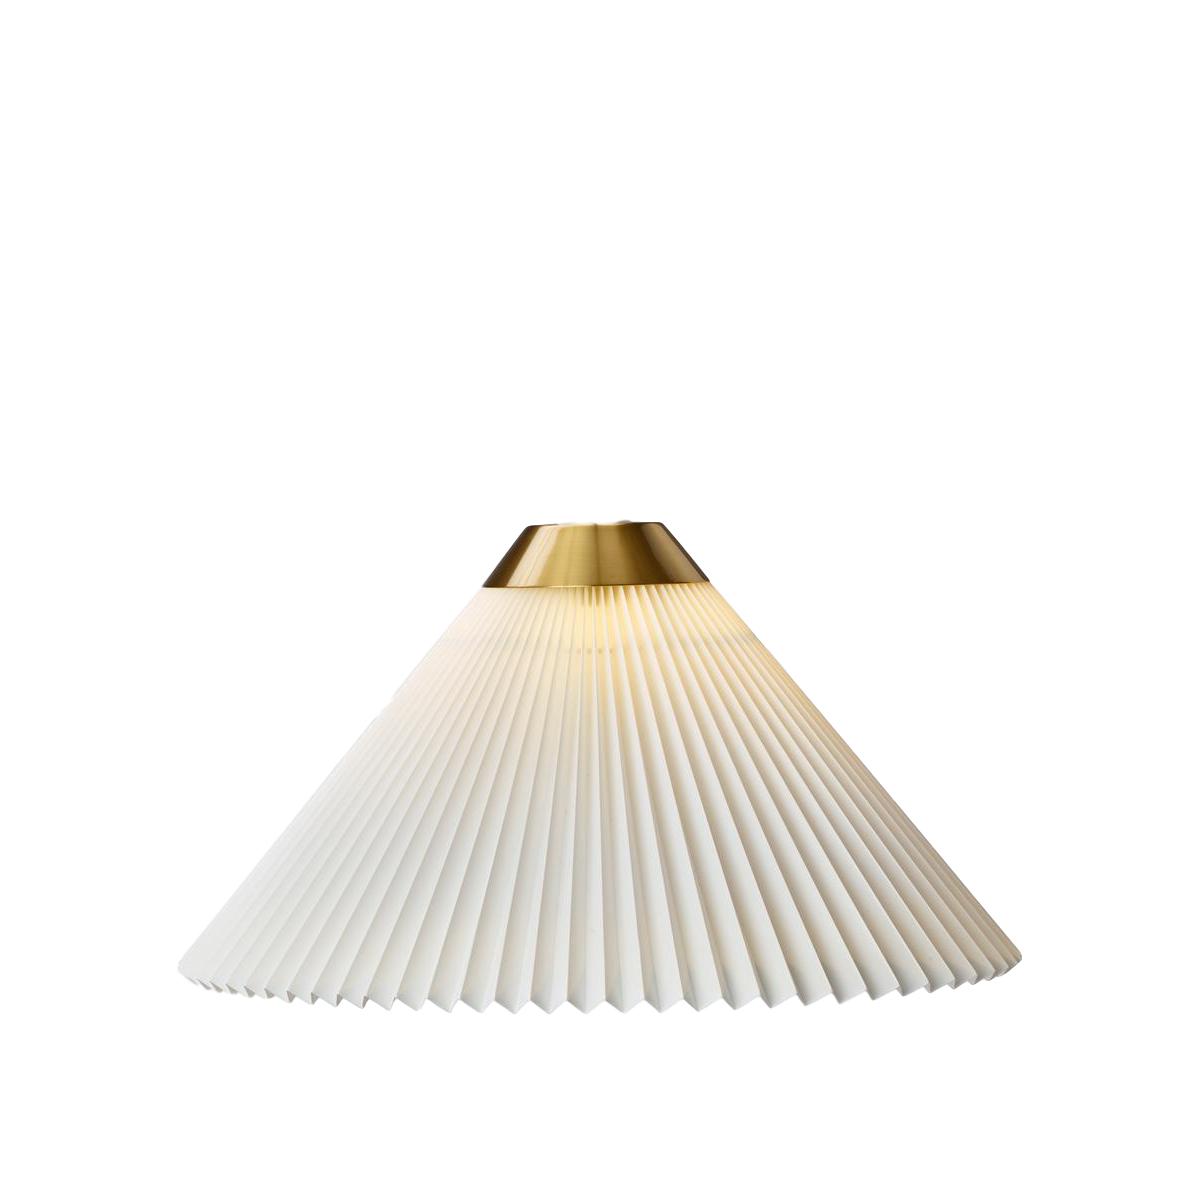 Le Klint Lampshade 12 incl. Houder 19 x32 cm, messing